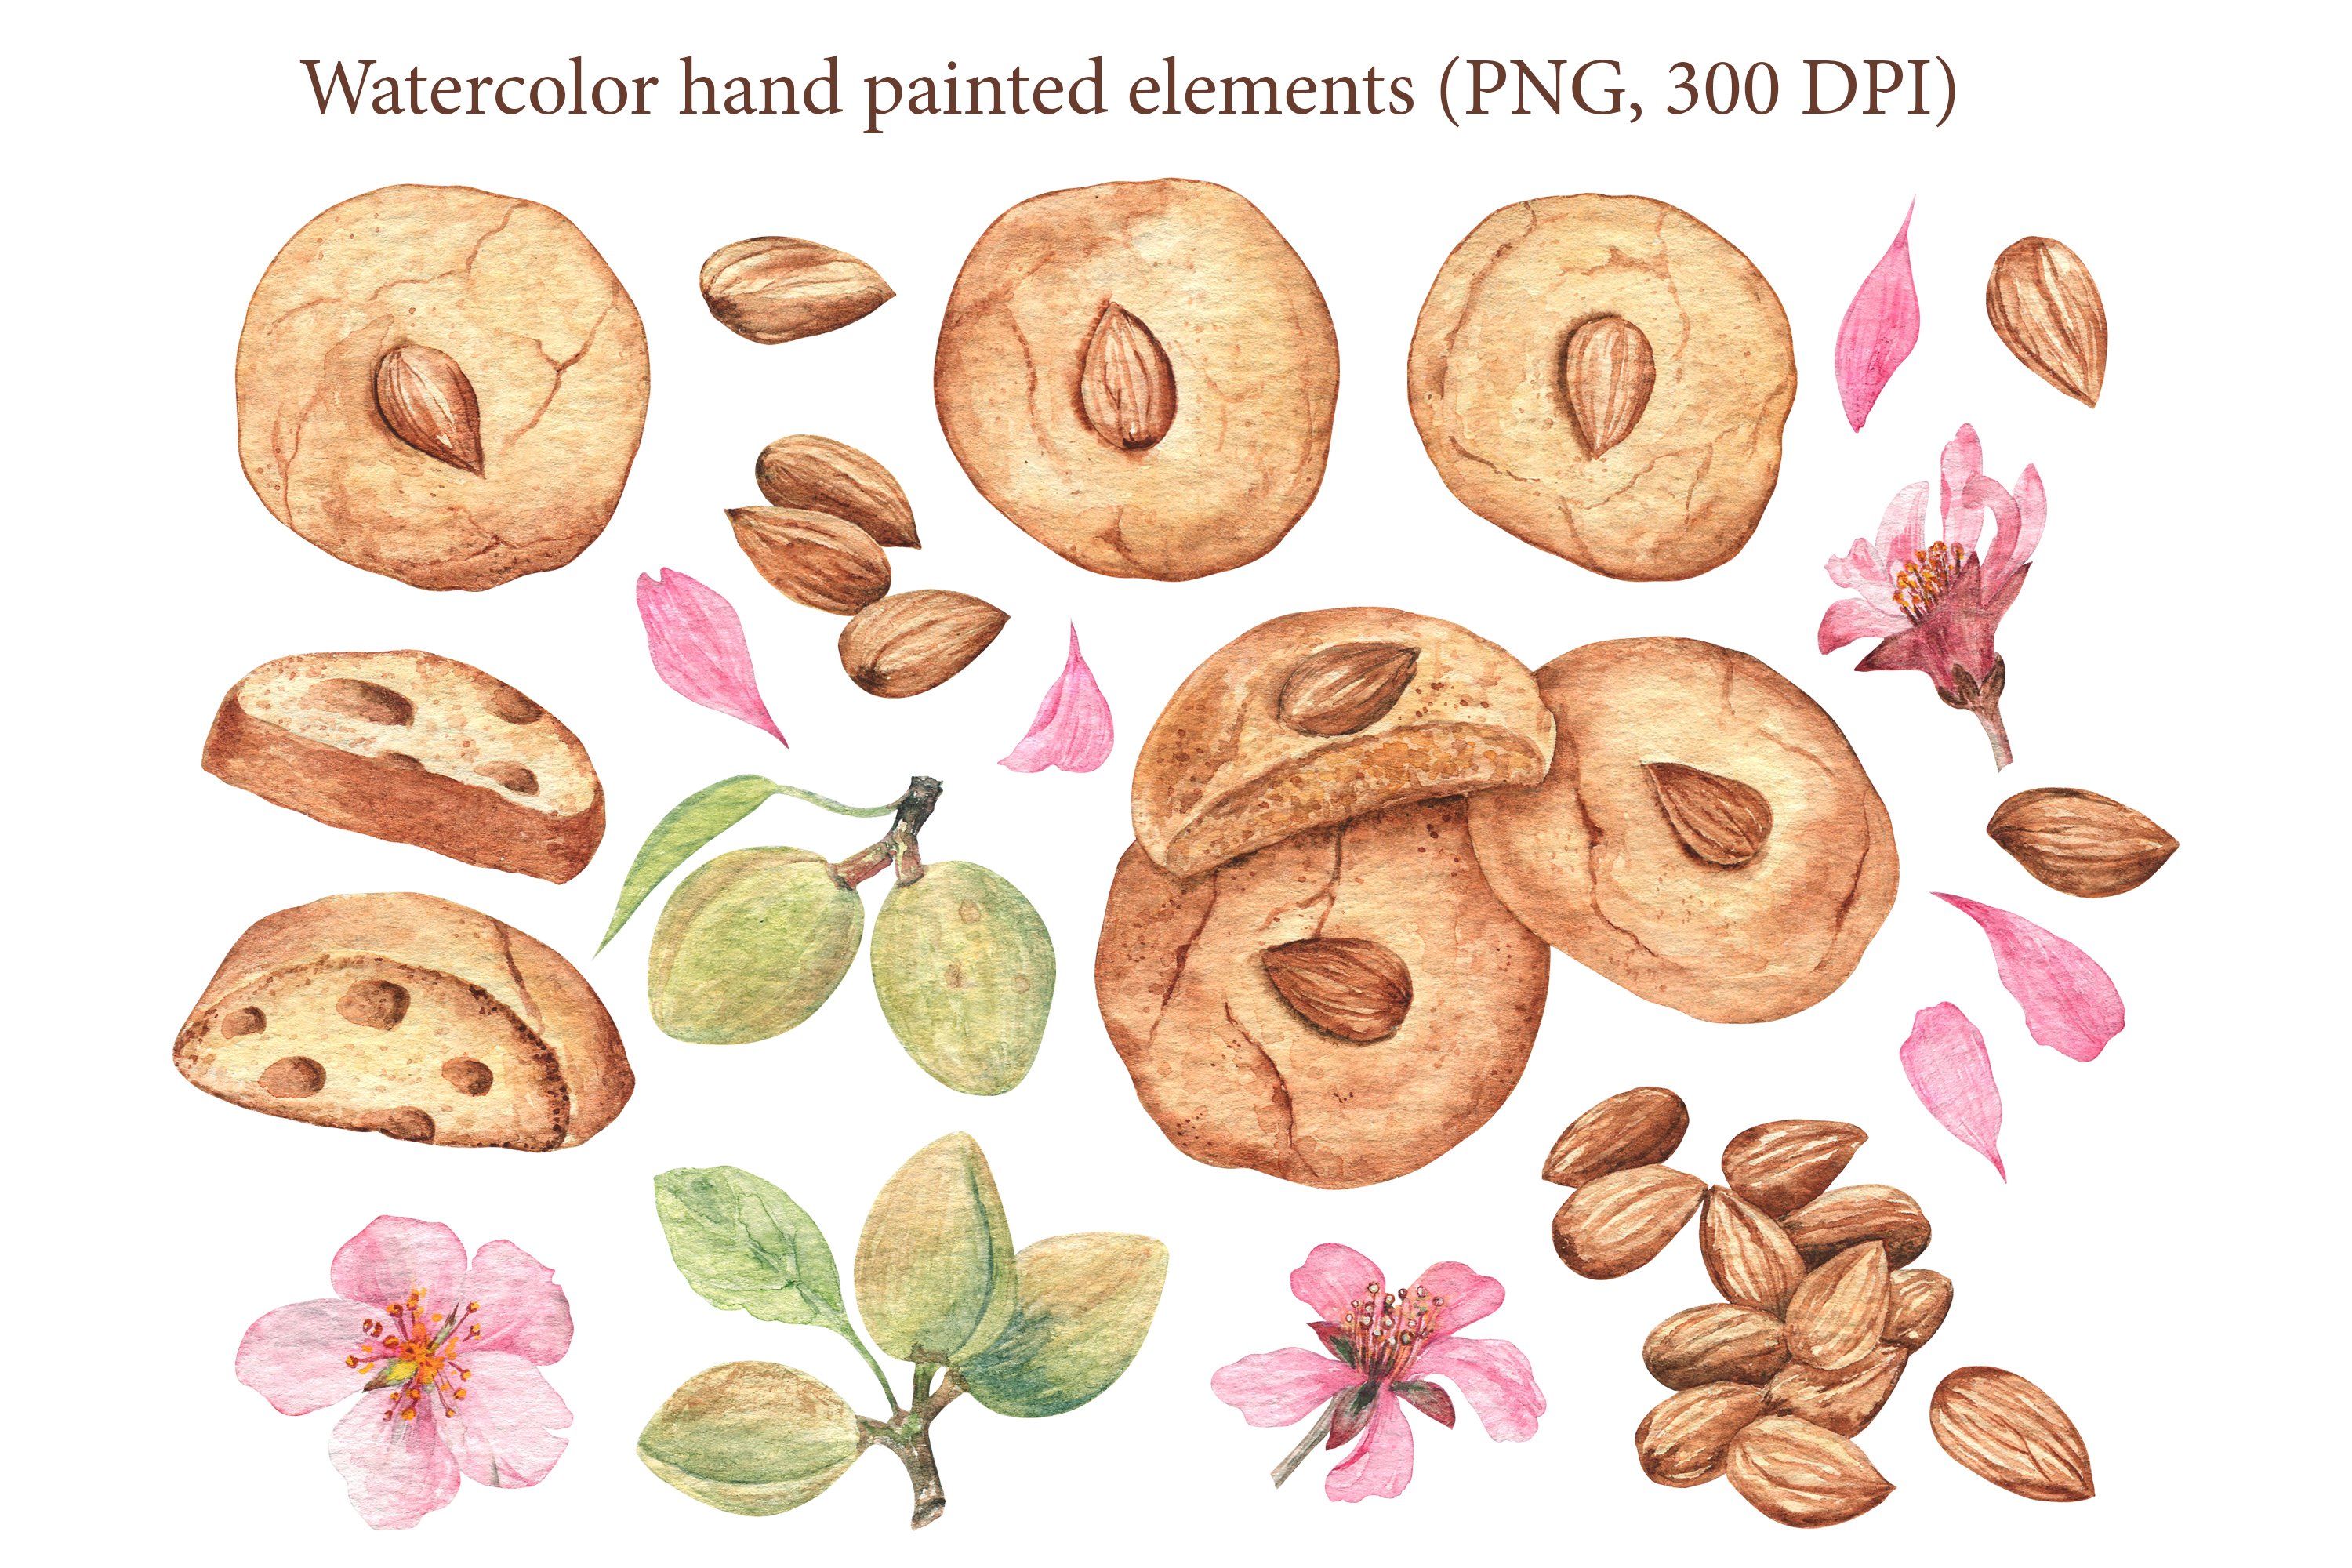 Hand painted almonds with flowers and plants.